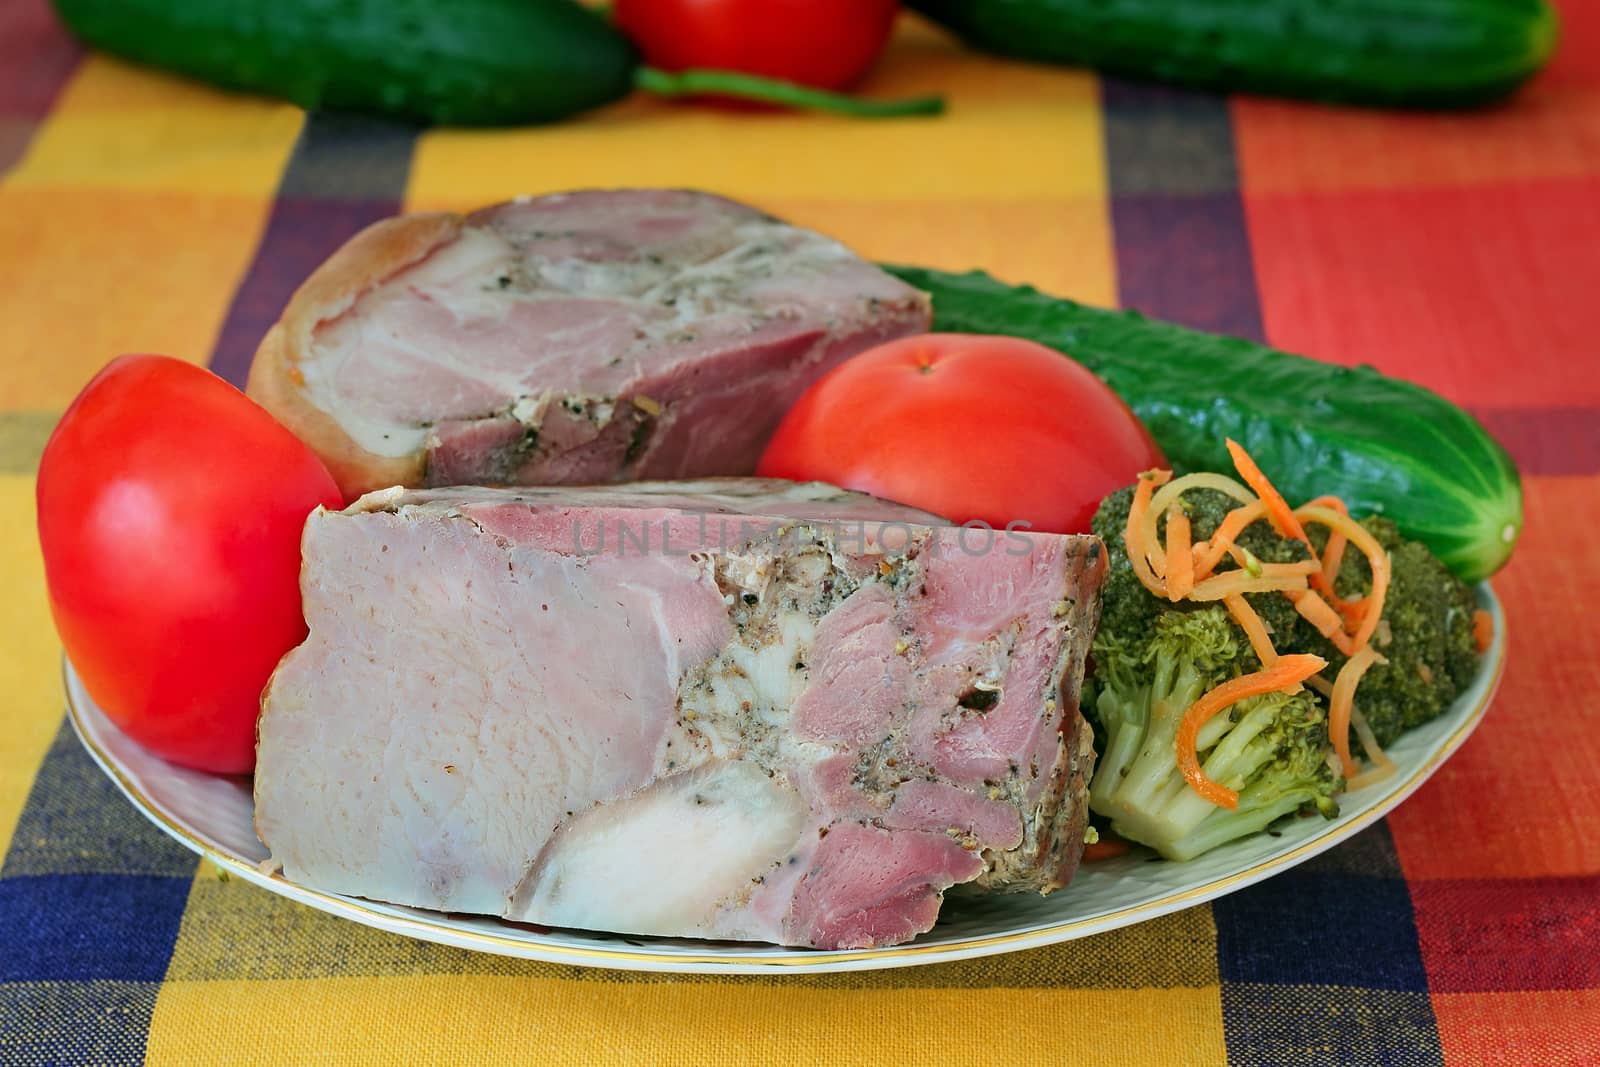 The big appetizing piece of smoked pork with vegetables is located on a table on a white plate.